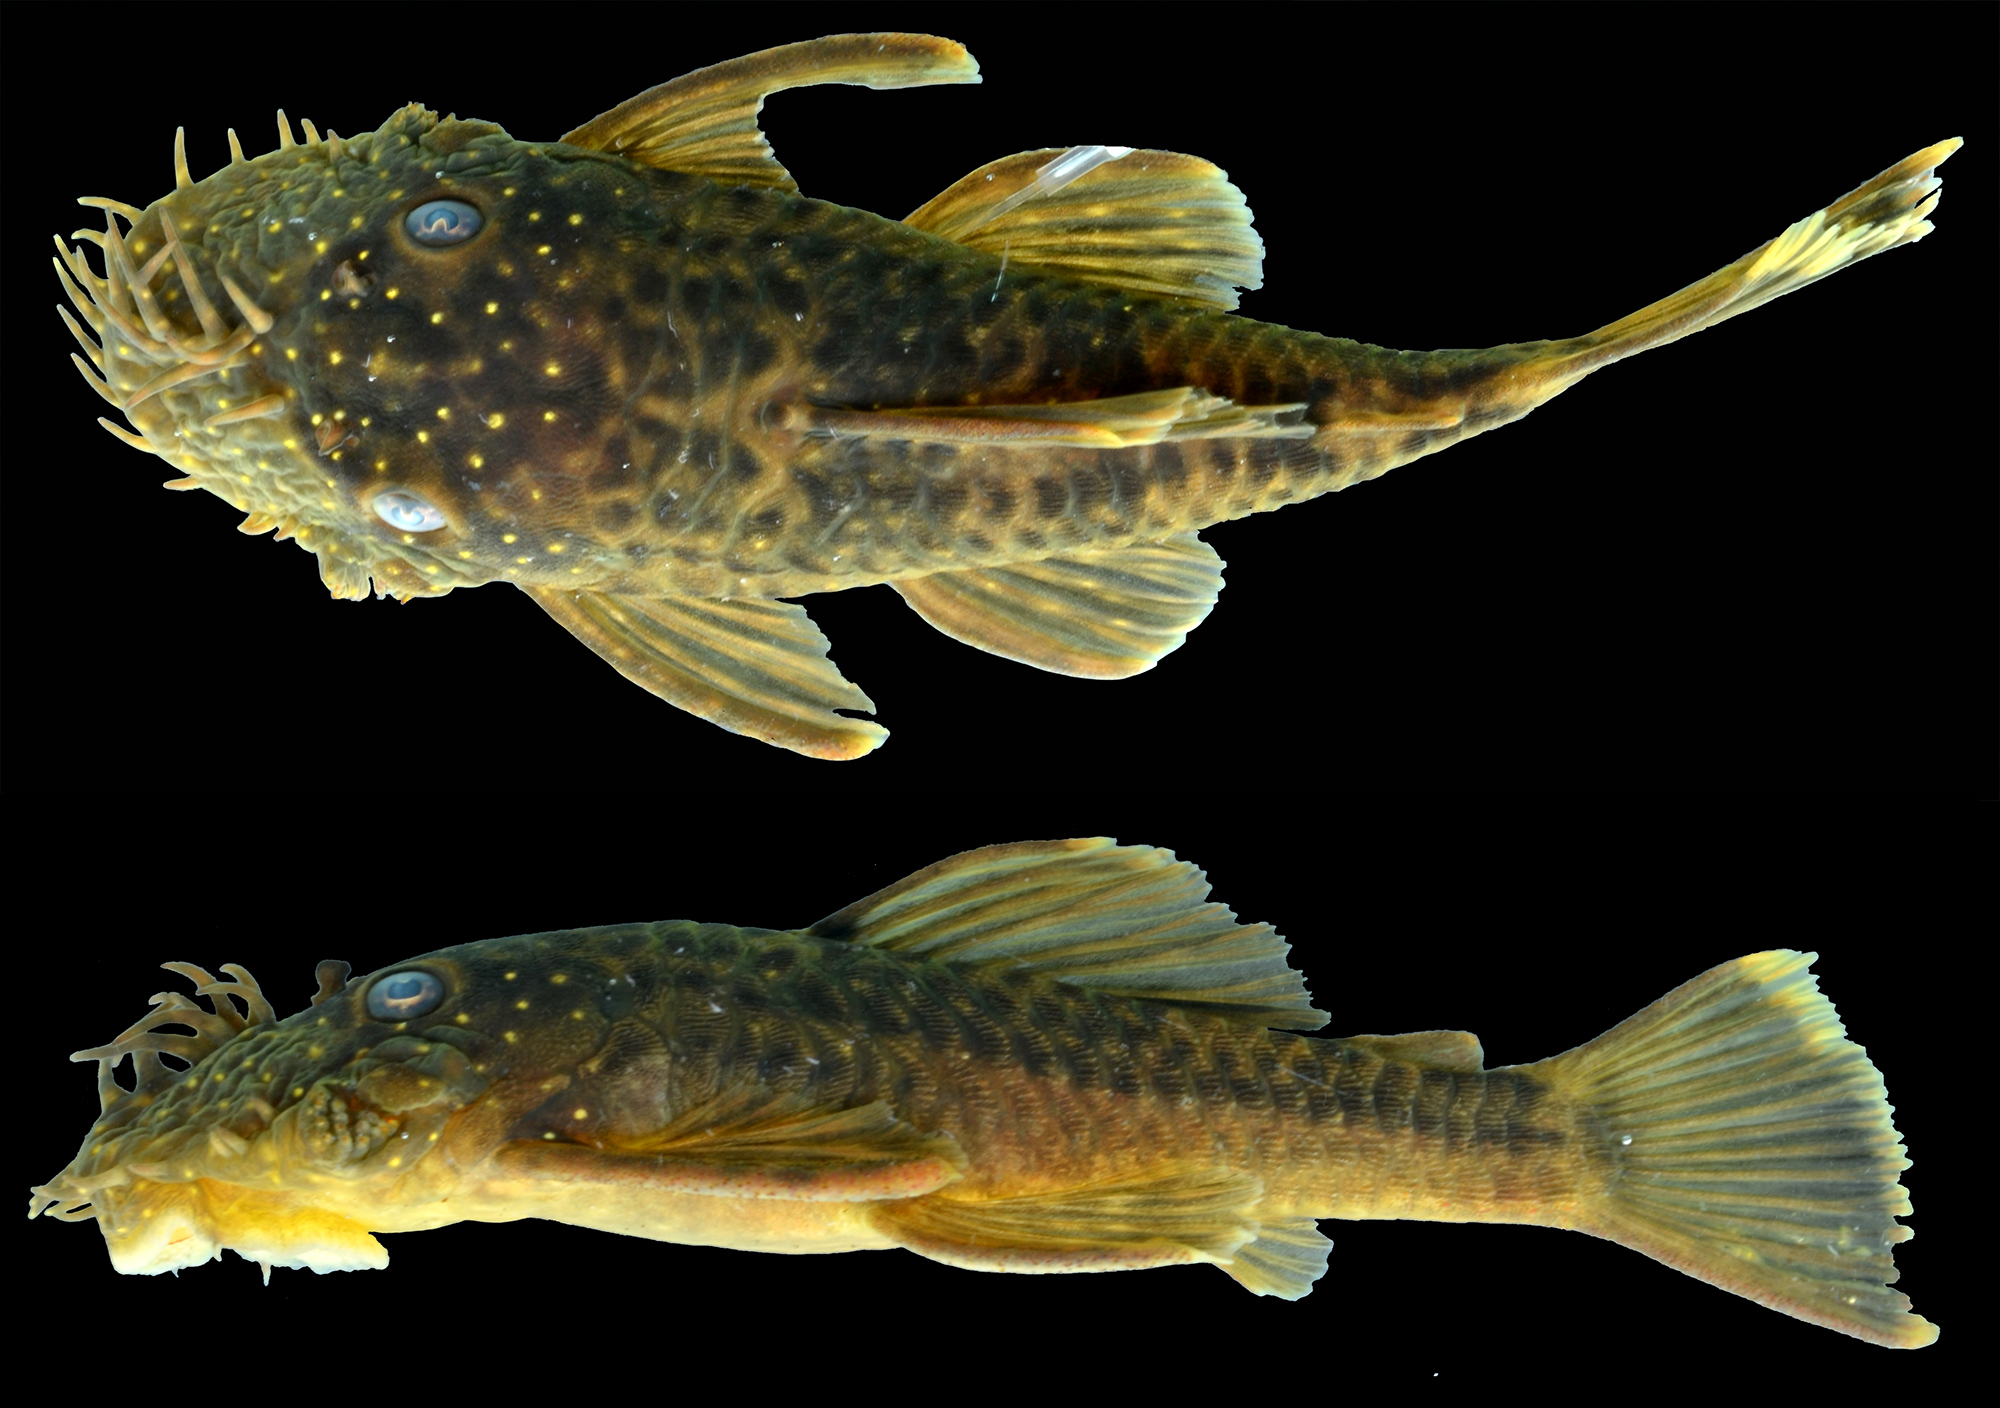 One of the new catfish species, Ancistrus kellerae.